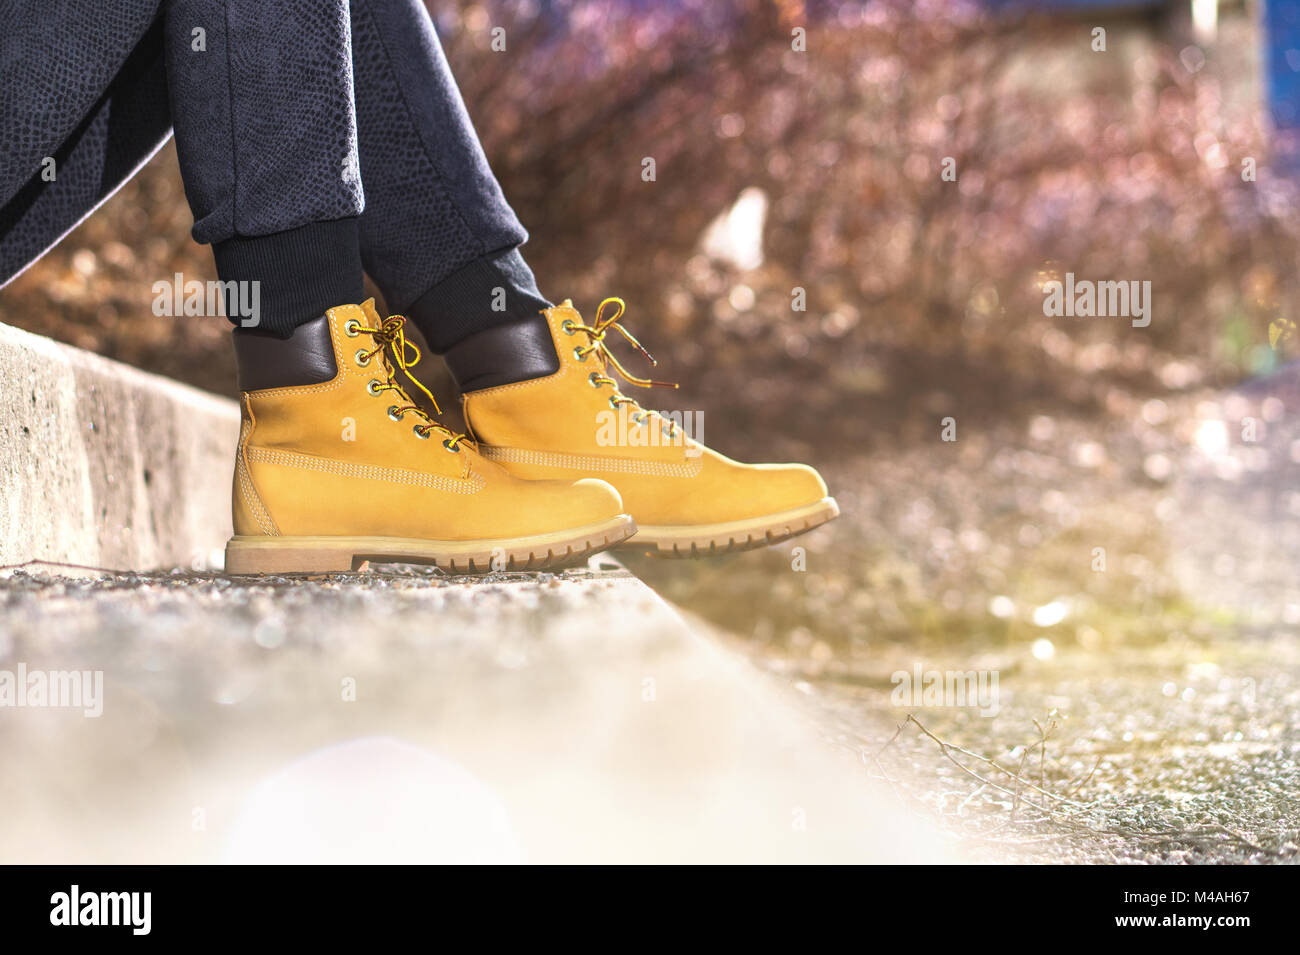 Trendy girl wearing yellow boots. Young woman with light brown shoes. Fashion lifestyle with autumn vibe. Stock Photo